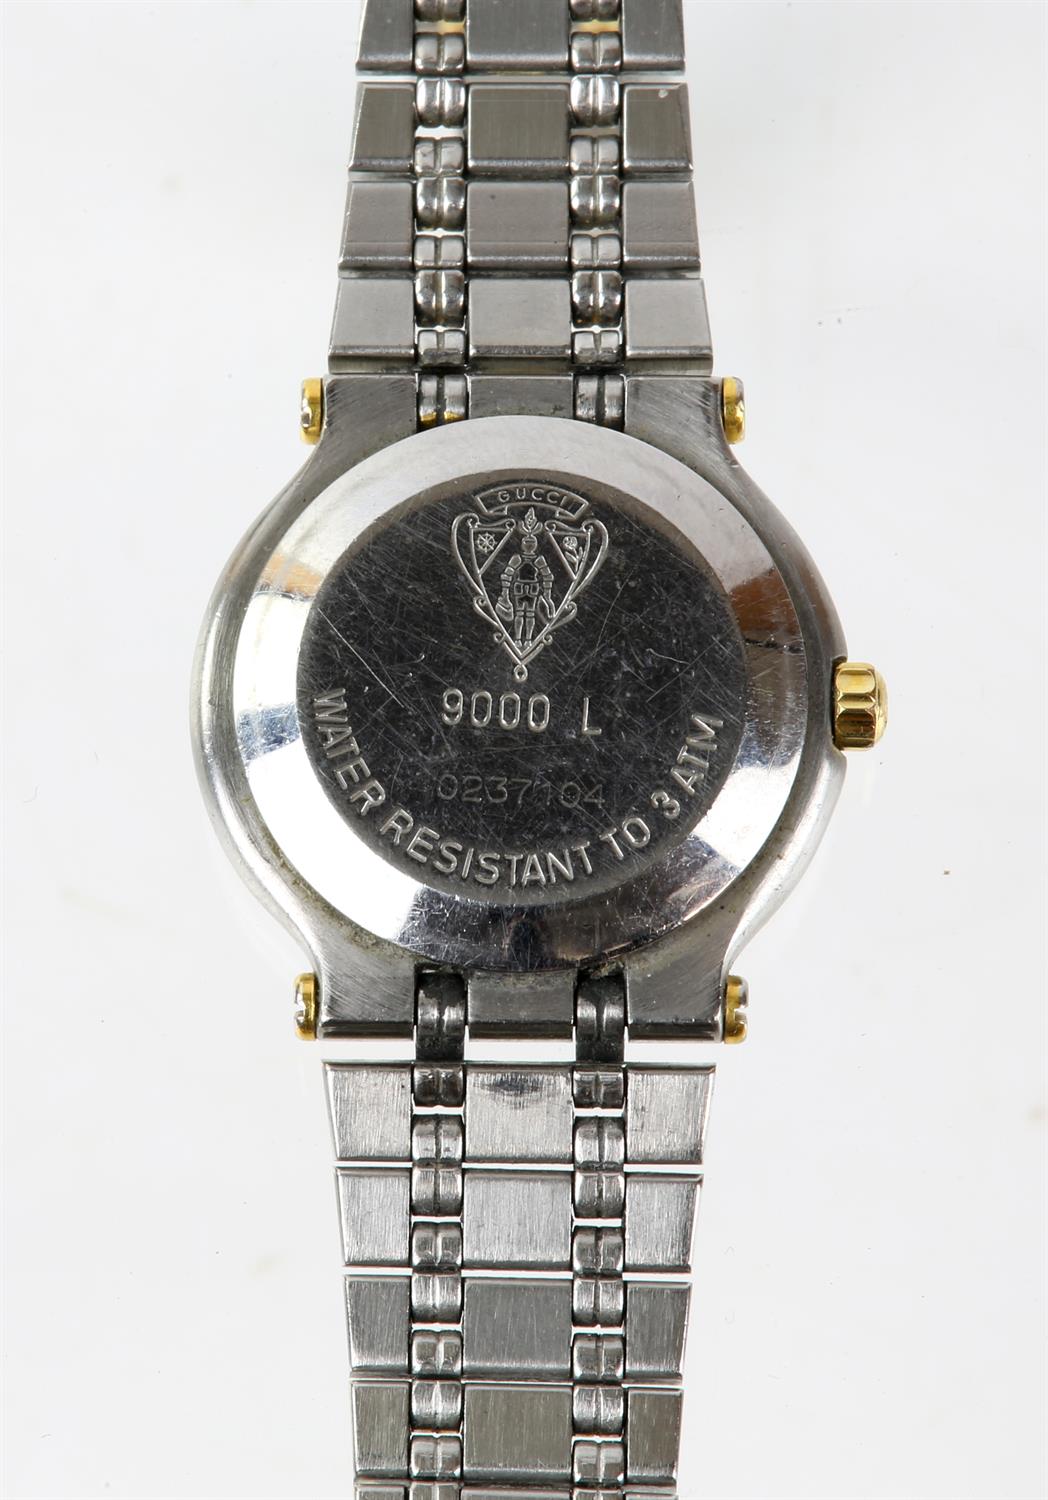 Ladies Gucci wristwatch, model 9000L, with circular cream dial, baton hour markers, - Image 6 of 6